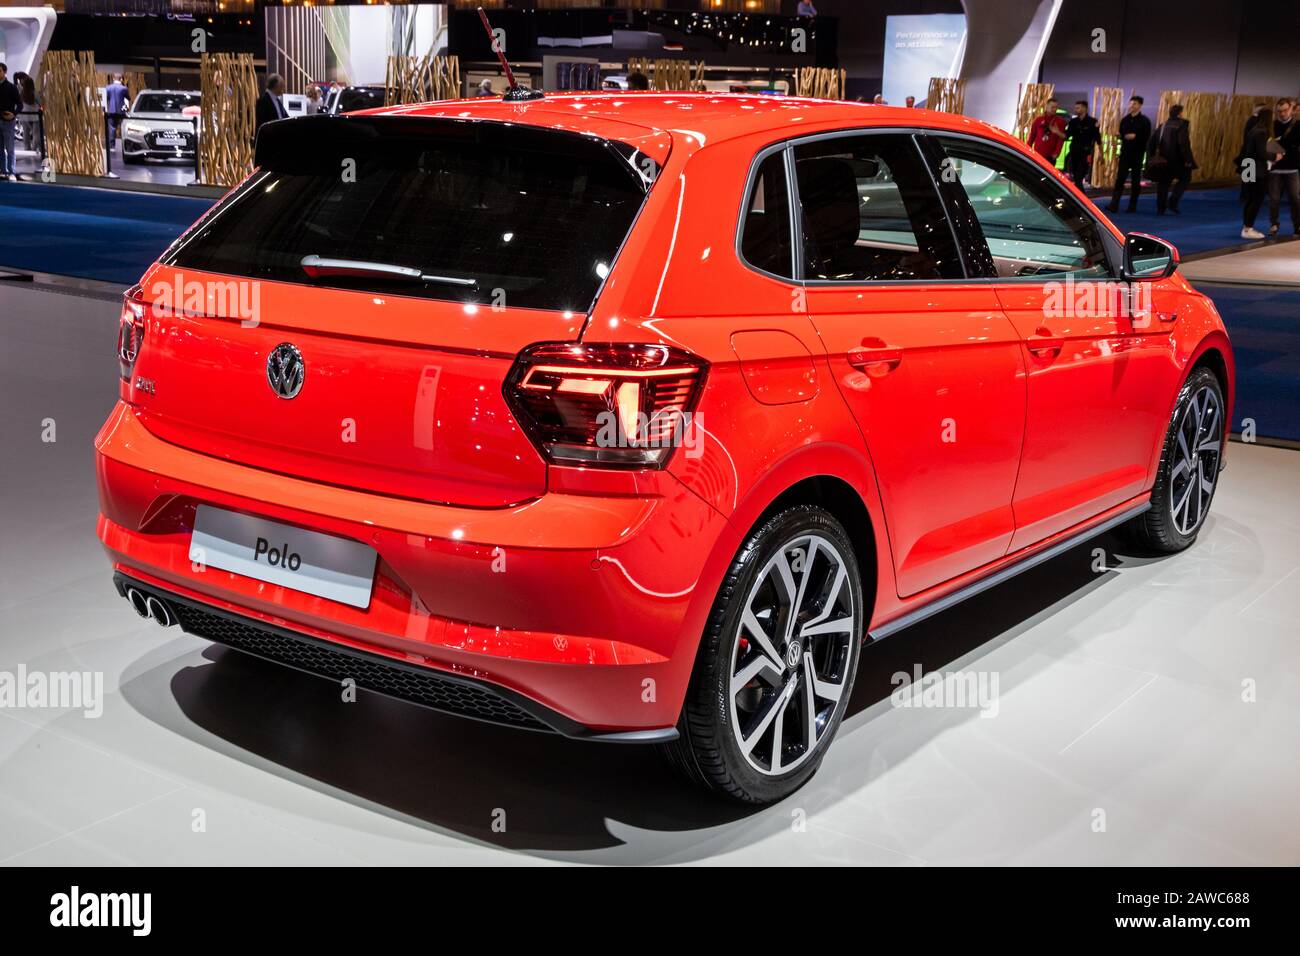 BRUSSELS - JAN 9, 2020: New Volkswagen Polo GTI car model showcased at the  Brussels Autosalon 2020 Motor Show Stock Photo - Alamy